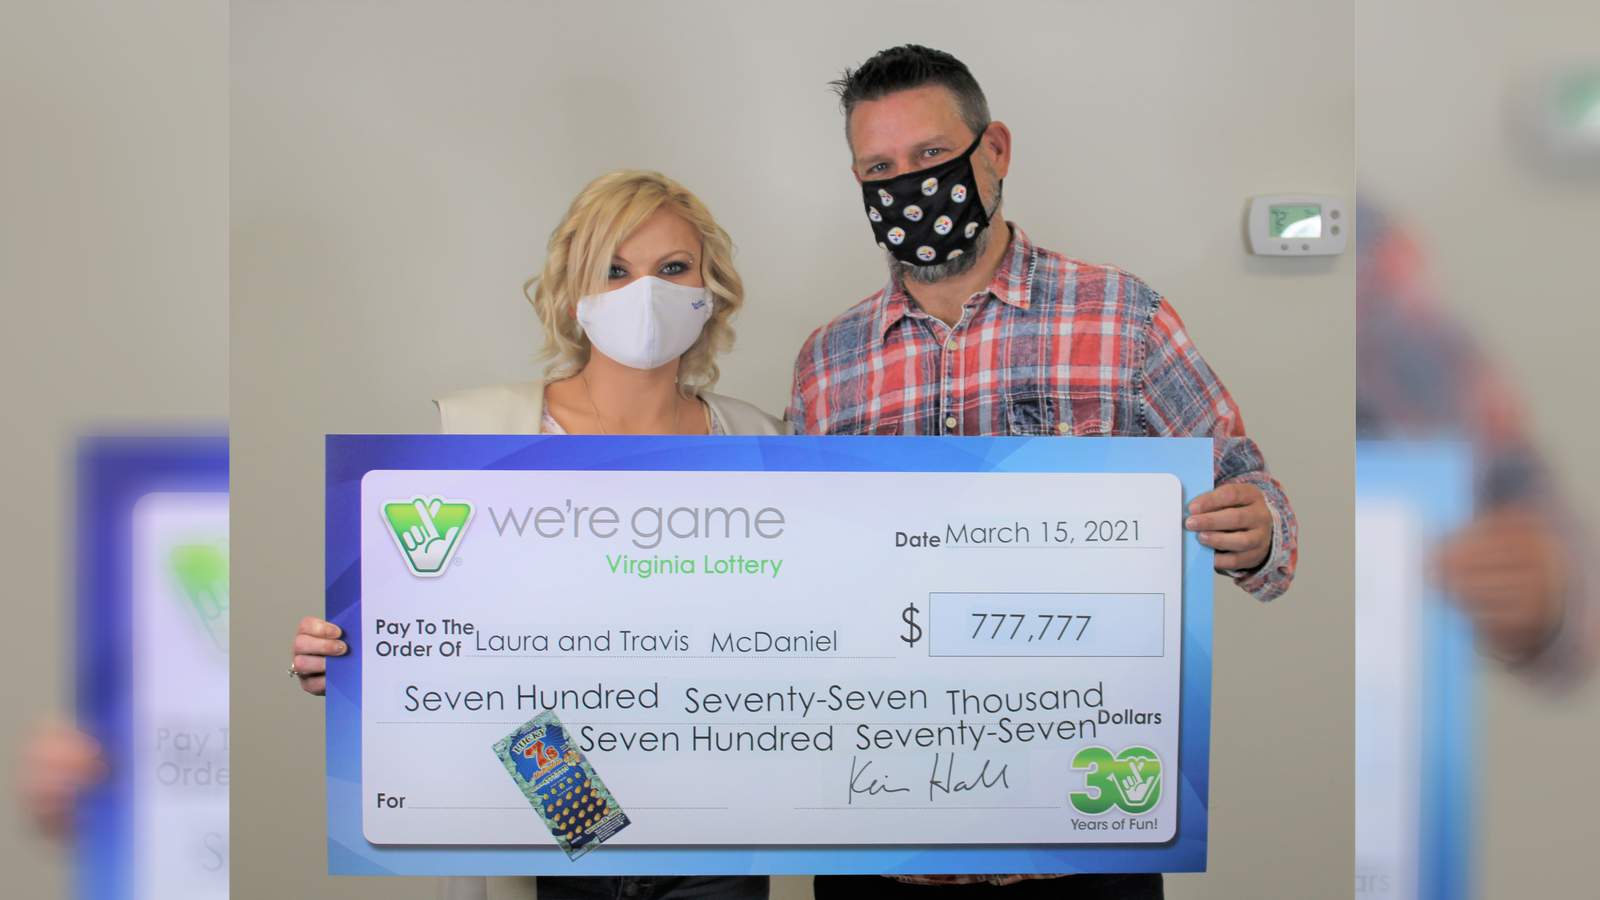 Henry County couple wins $777,777 from Virginia Lottery Scratcher